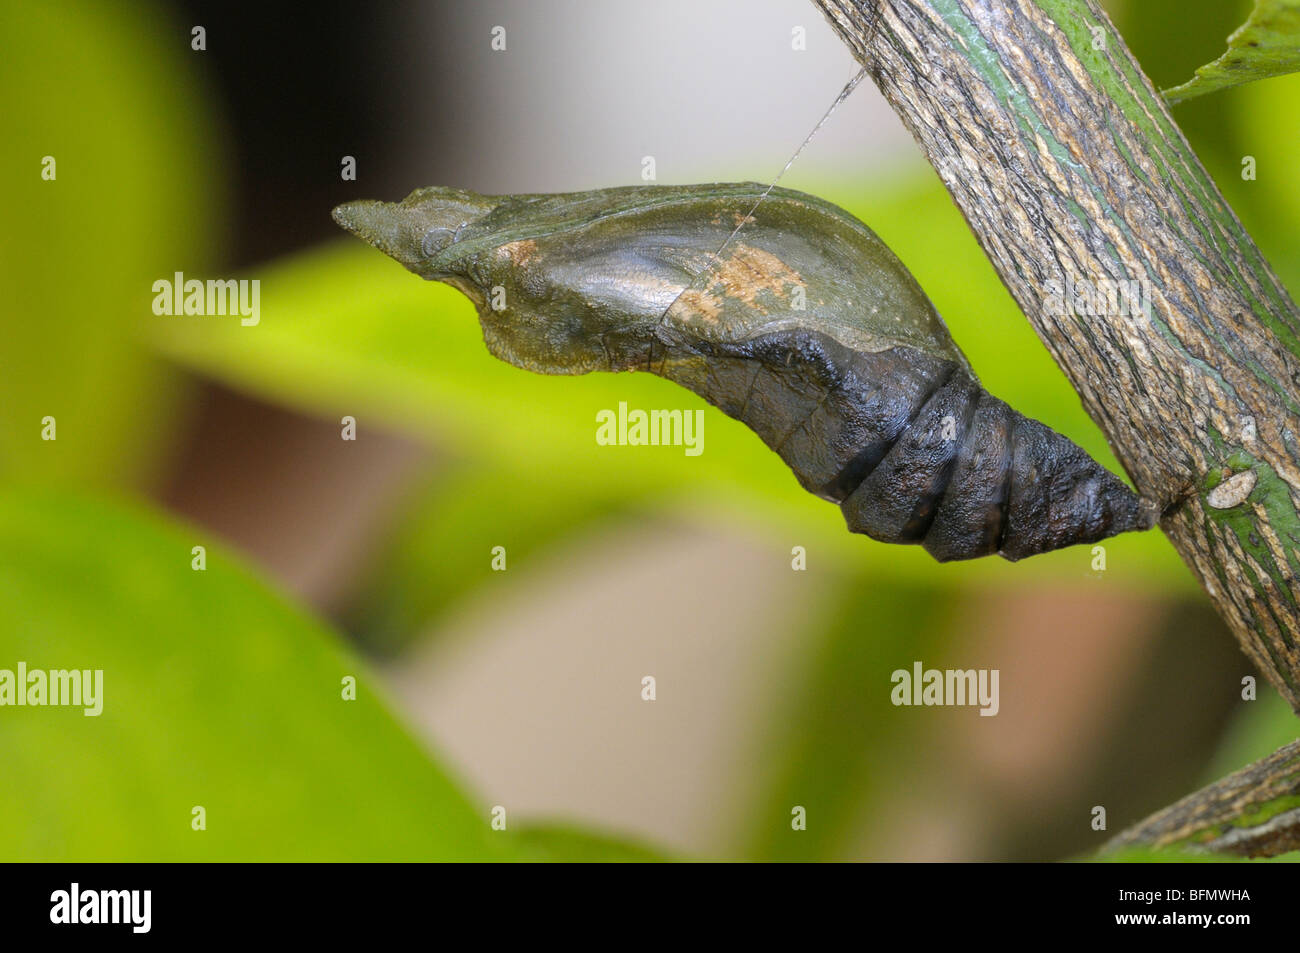 Tropical Butterfly Pupa High Resolution Stock Photography and Images - Alamy